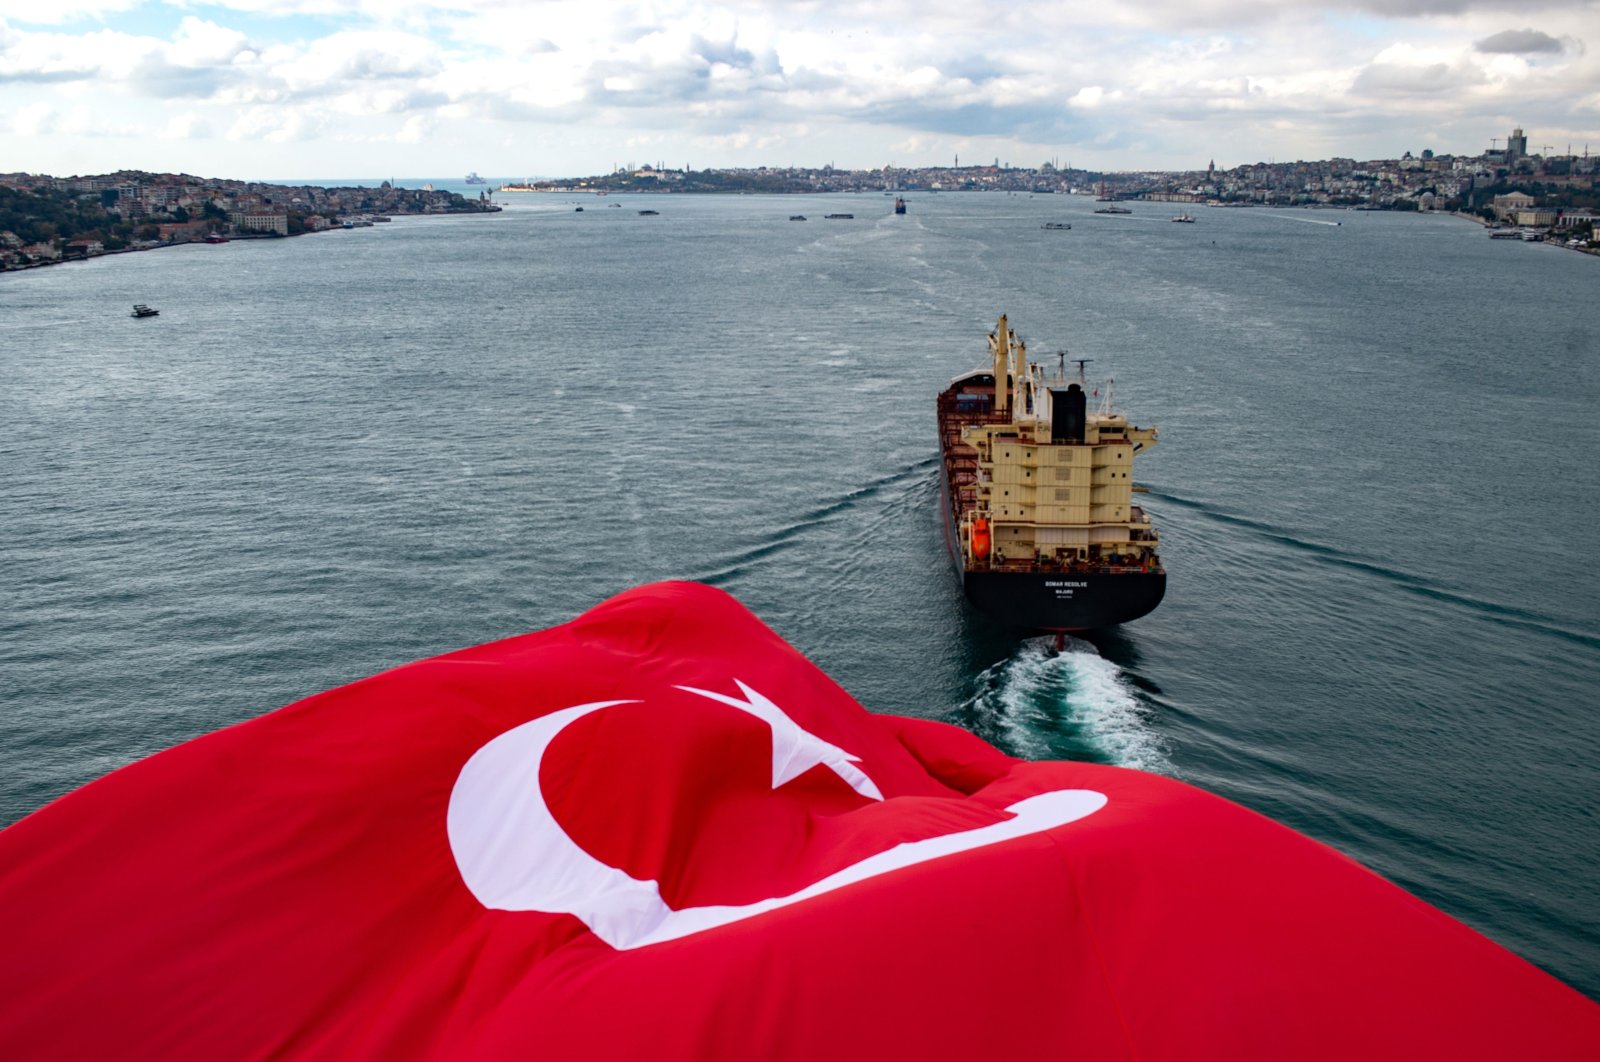 The Turkish national flag waves on the July 15 Martyrs' Bridge, formerly known as the Bosporus Bridge, as a ship sails through the Bosporus, in Istanbul, Turkey Nov. 8, 2020. (AFP Photo)